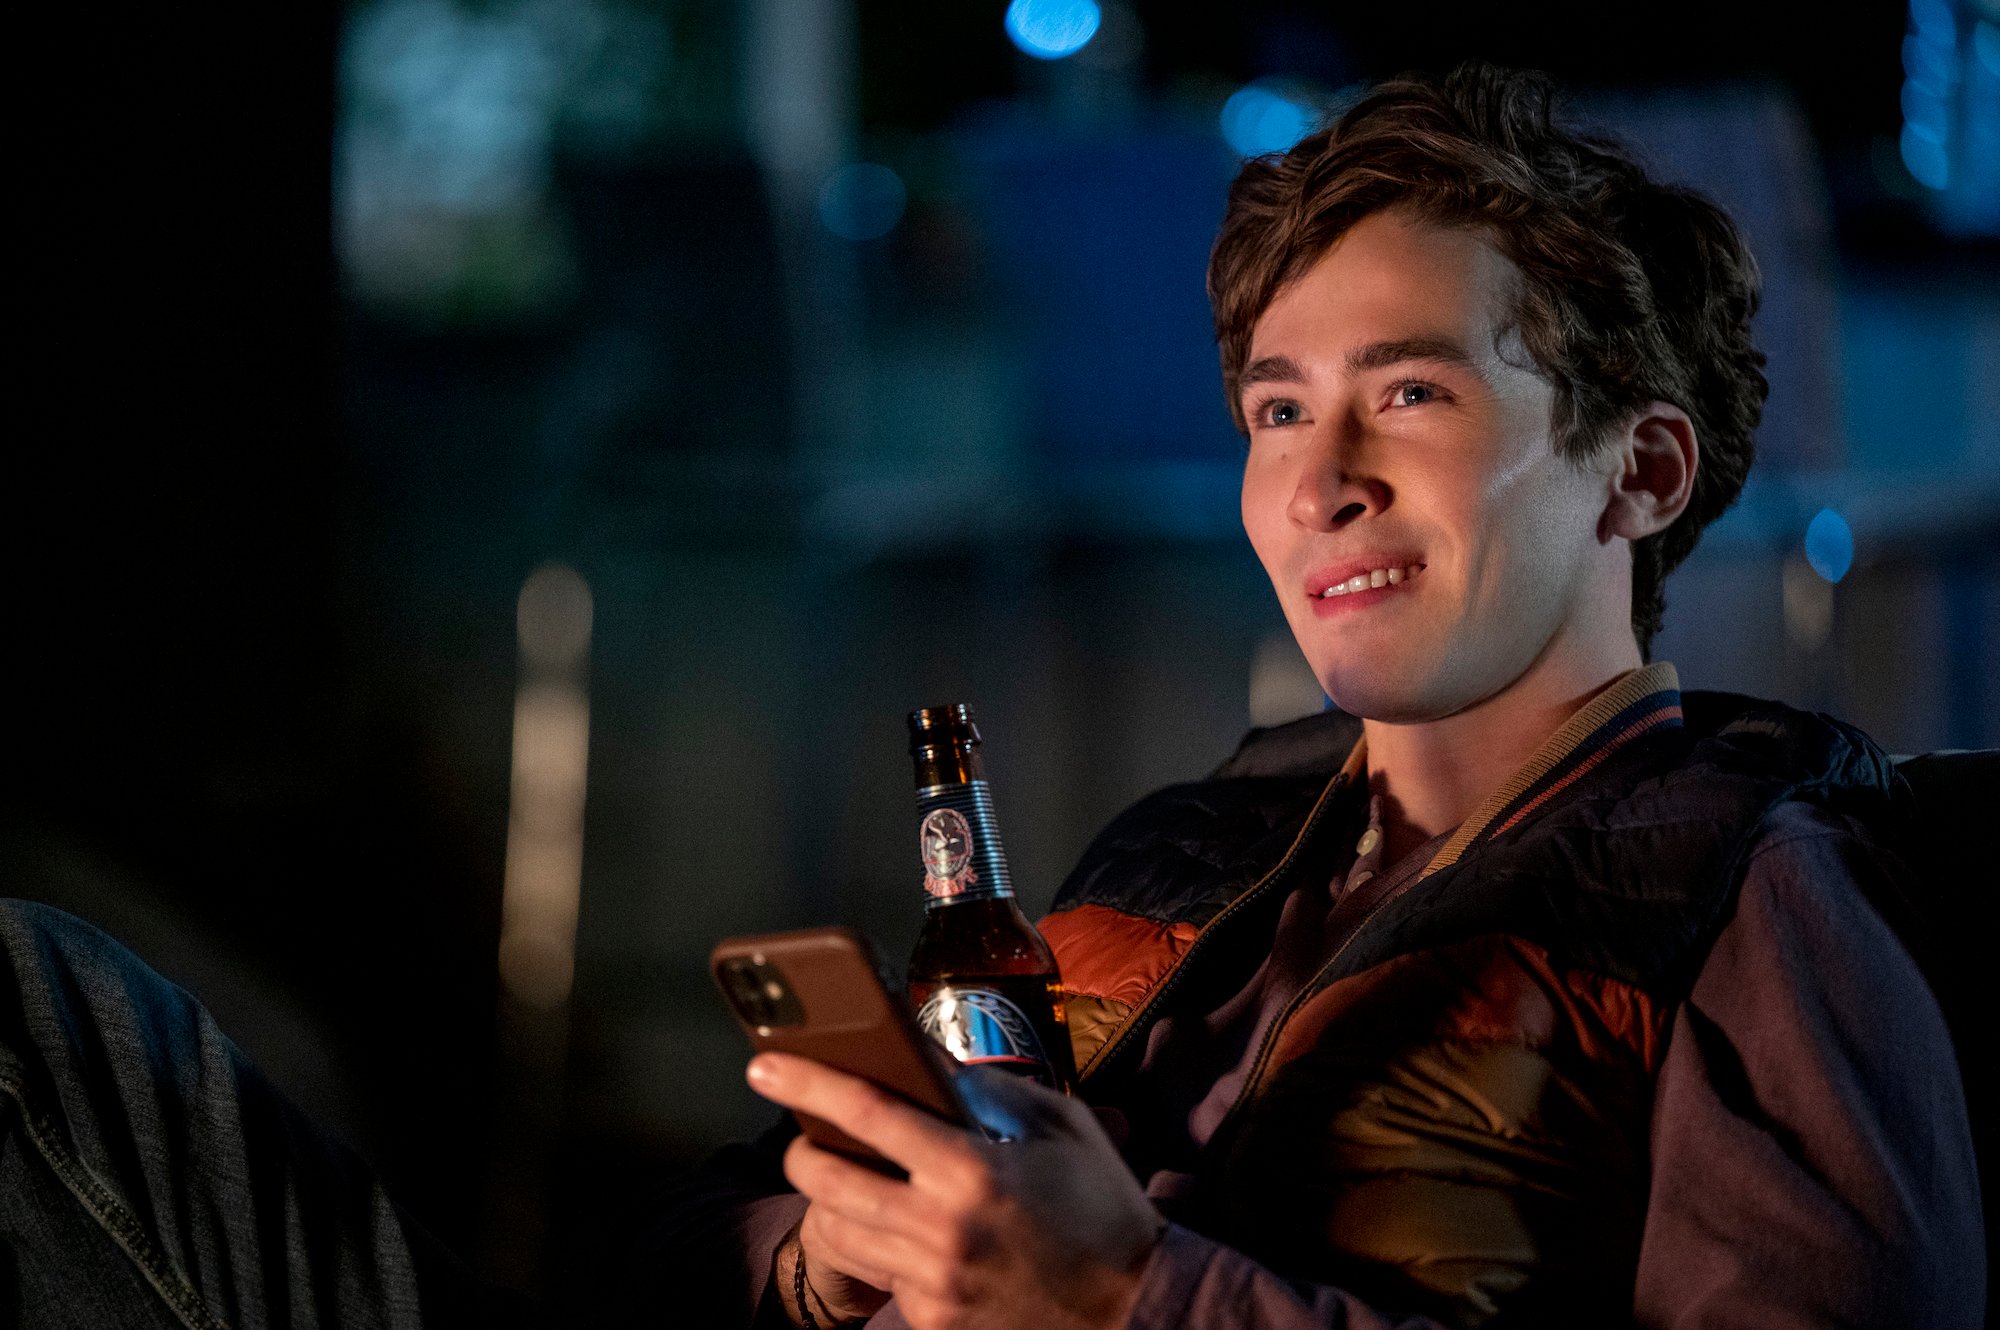 Dylan Arnold drinking a beer in 'You' Season 3.